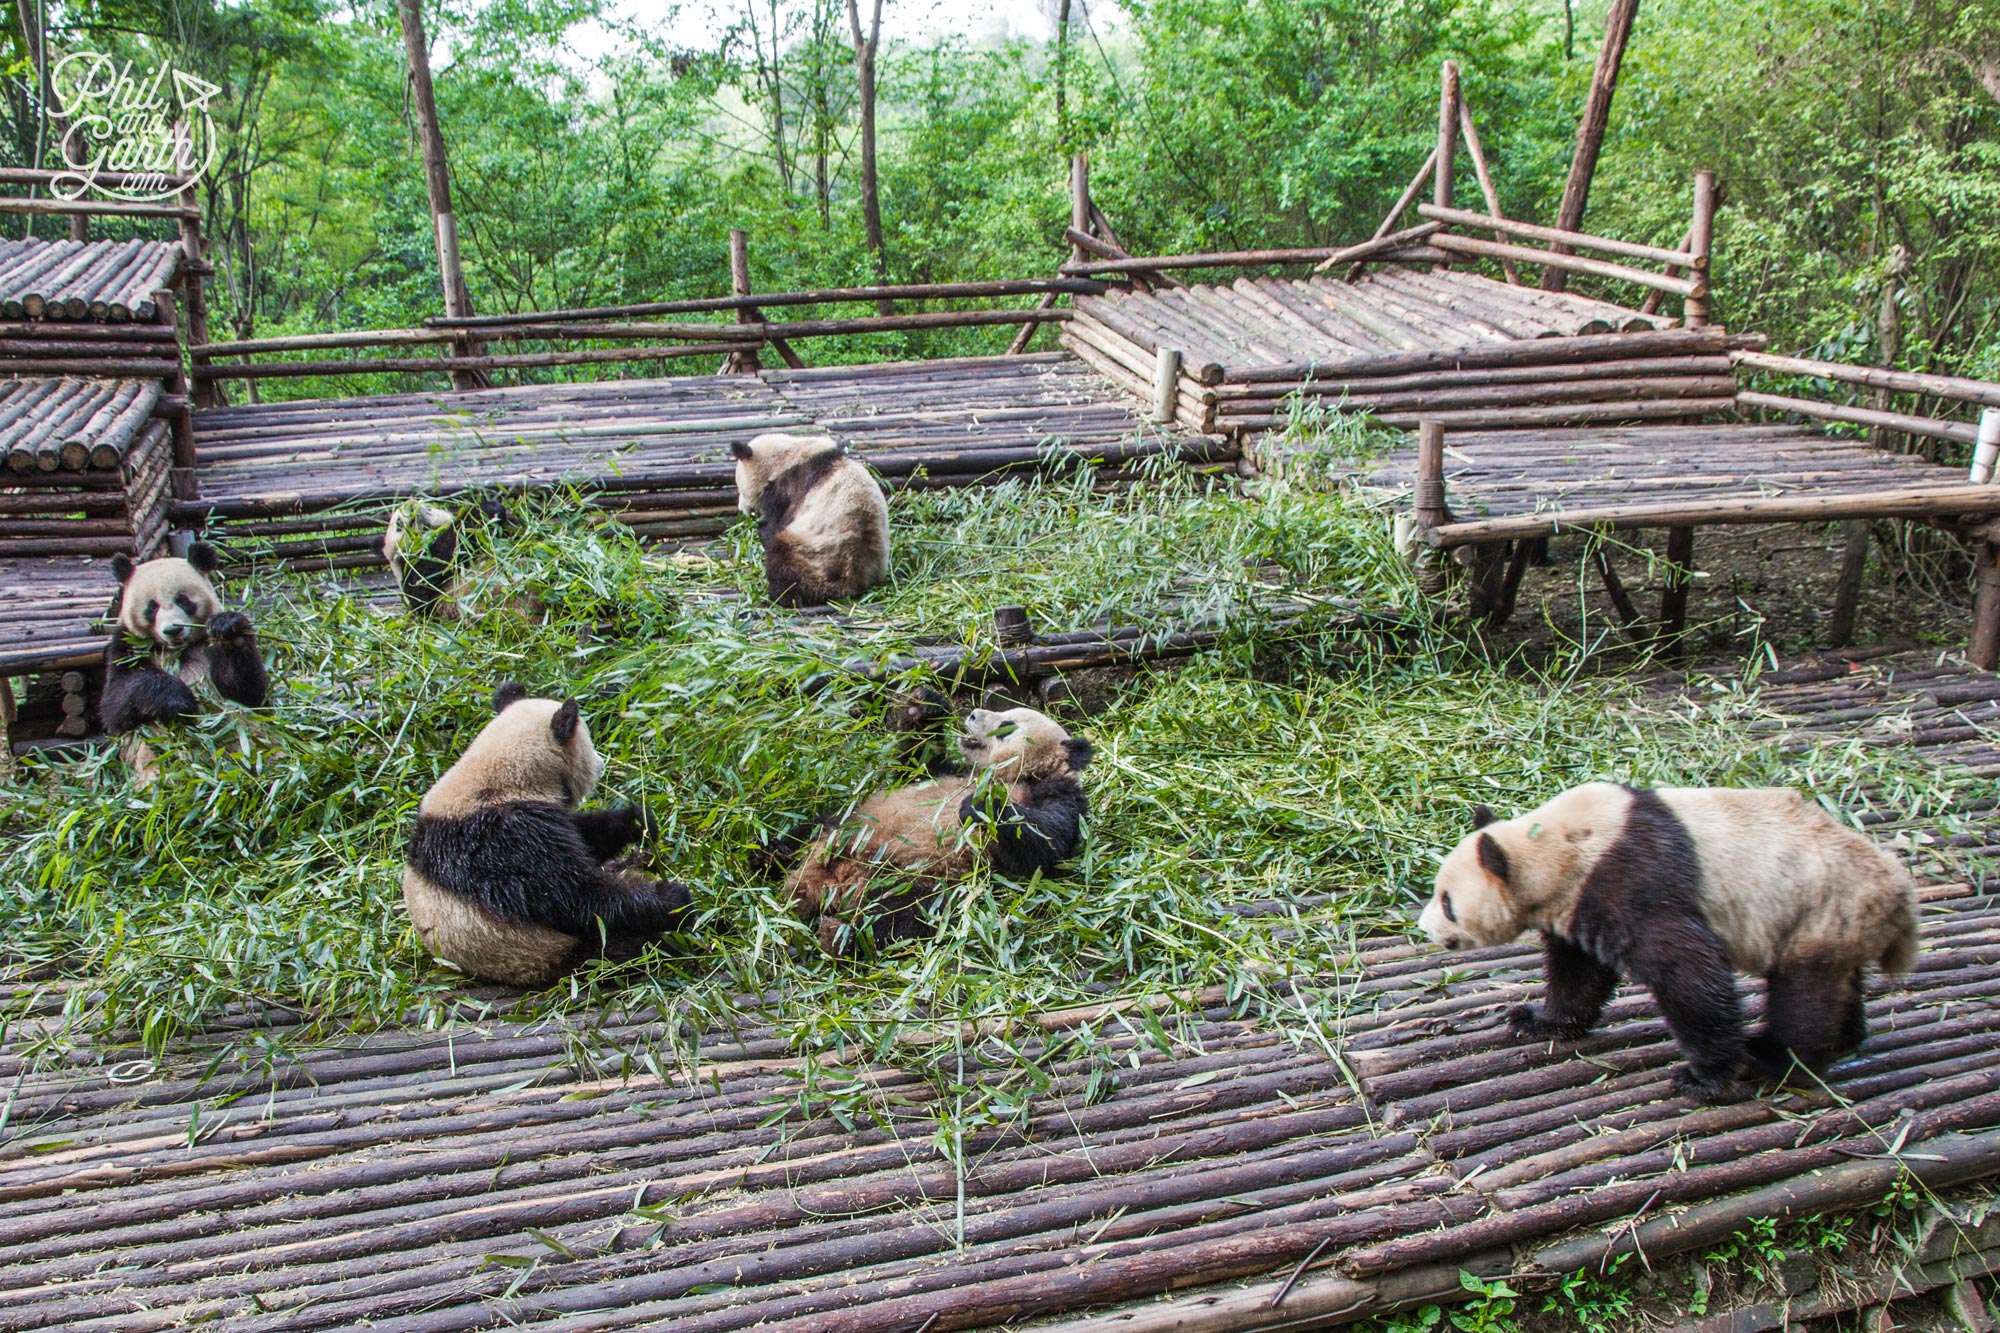 OMG Chengdu's cuddly and adorable giant pandas